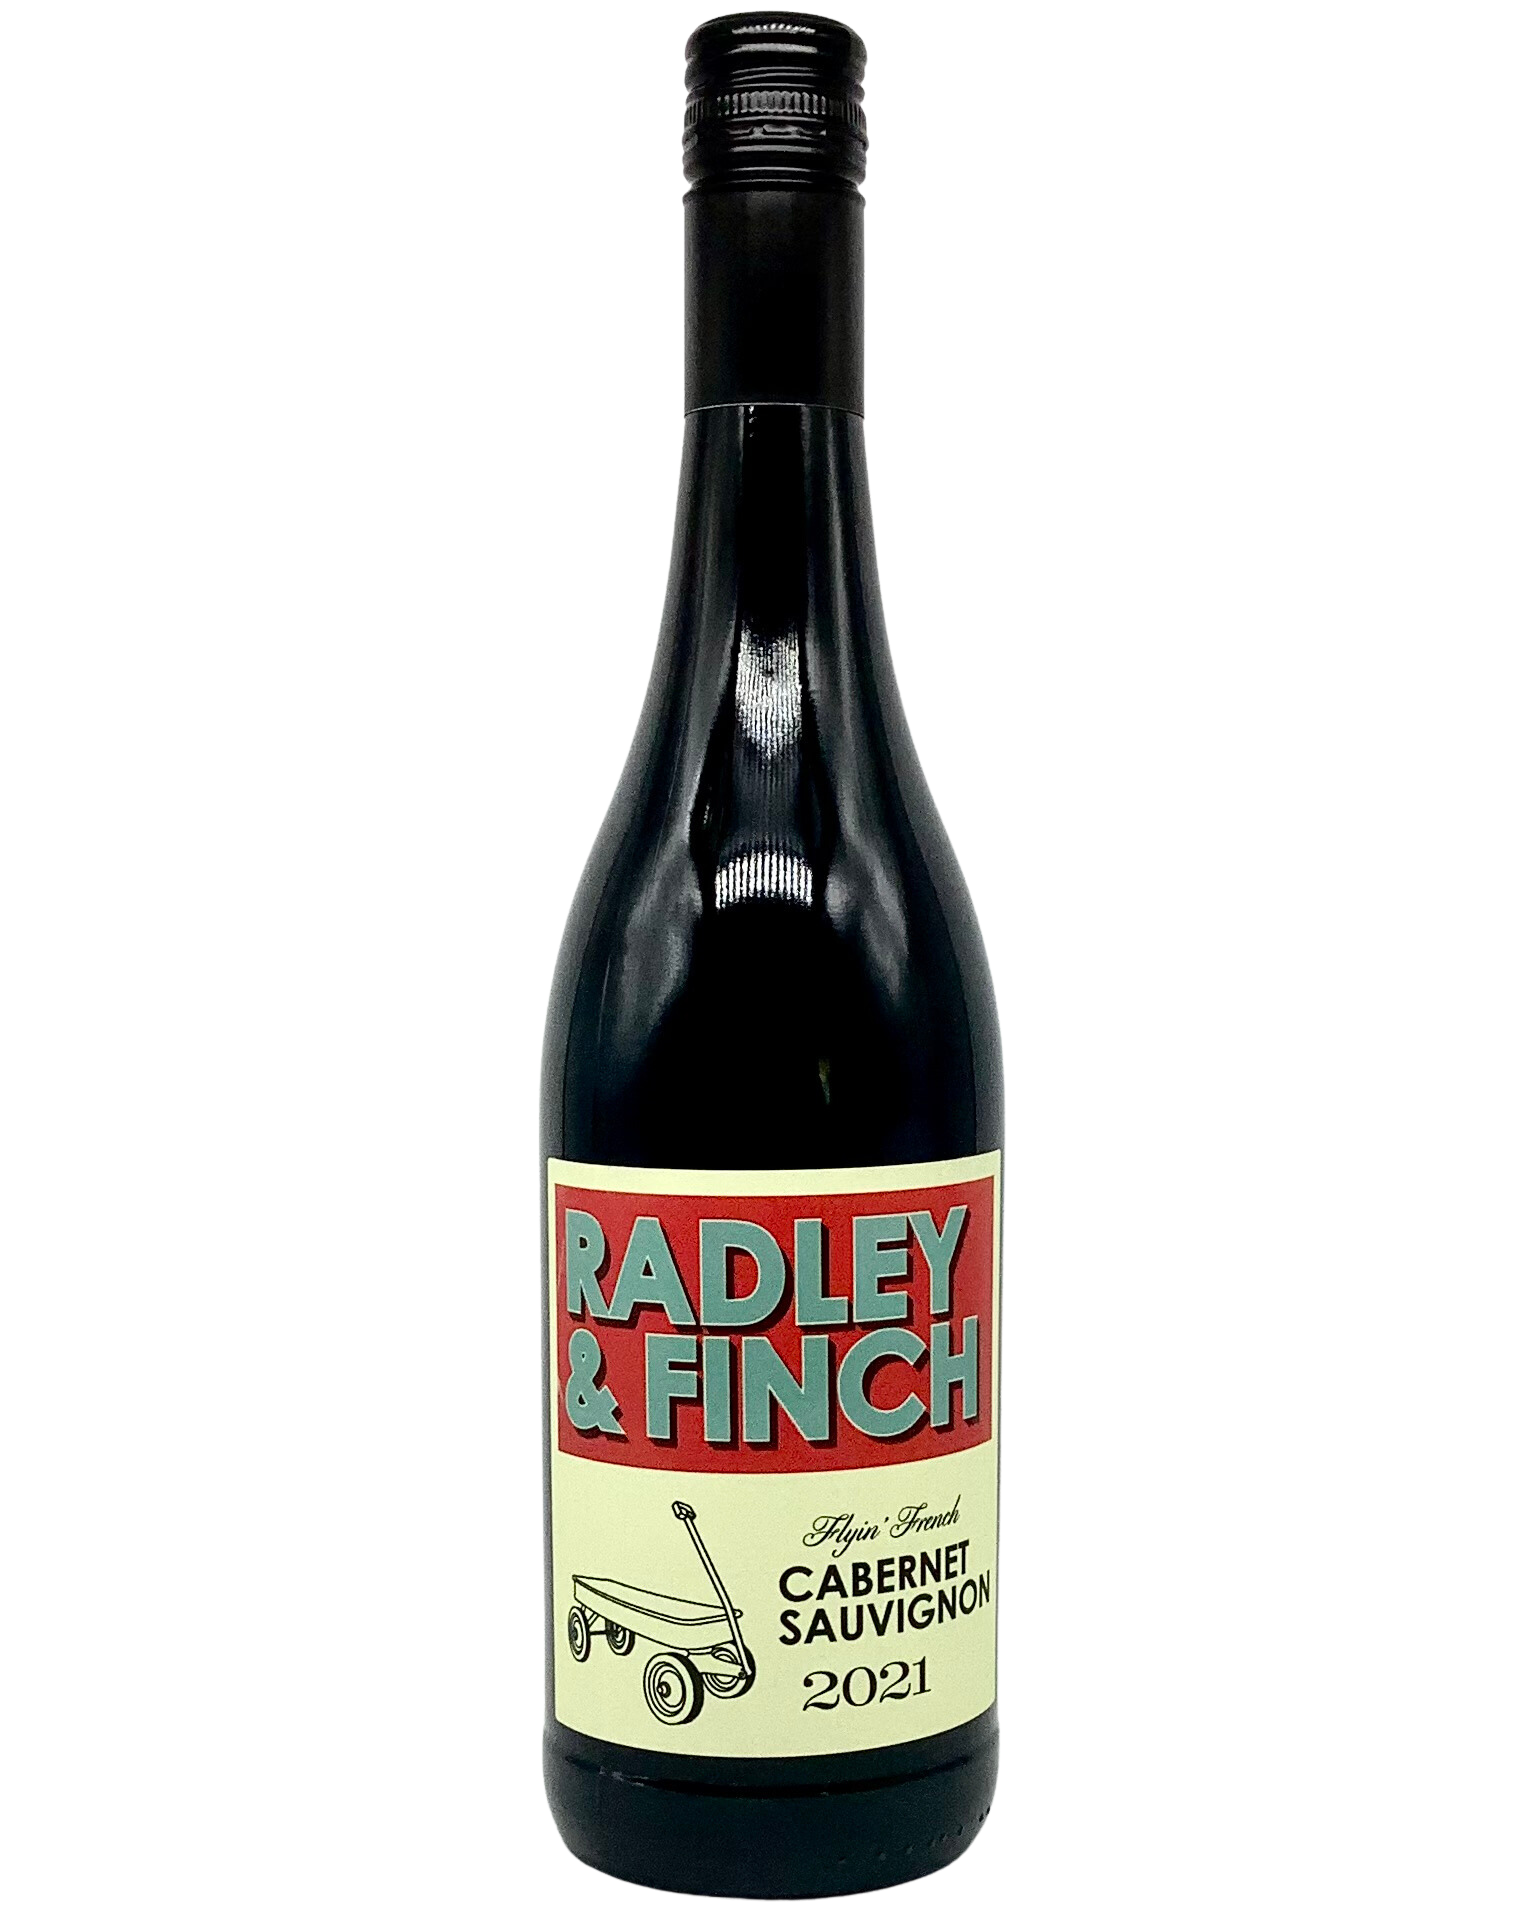 Radley & Finch "Flyin' French" Cabernet Sauvignon, Western Cape, South Africa 2021